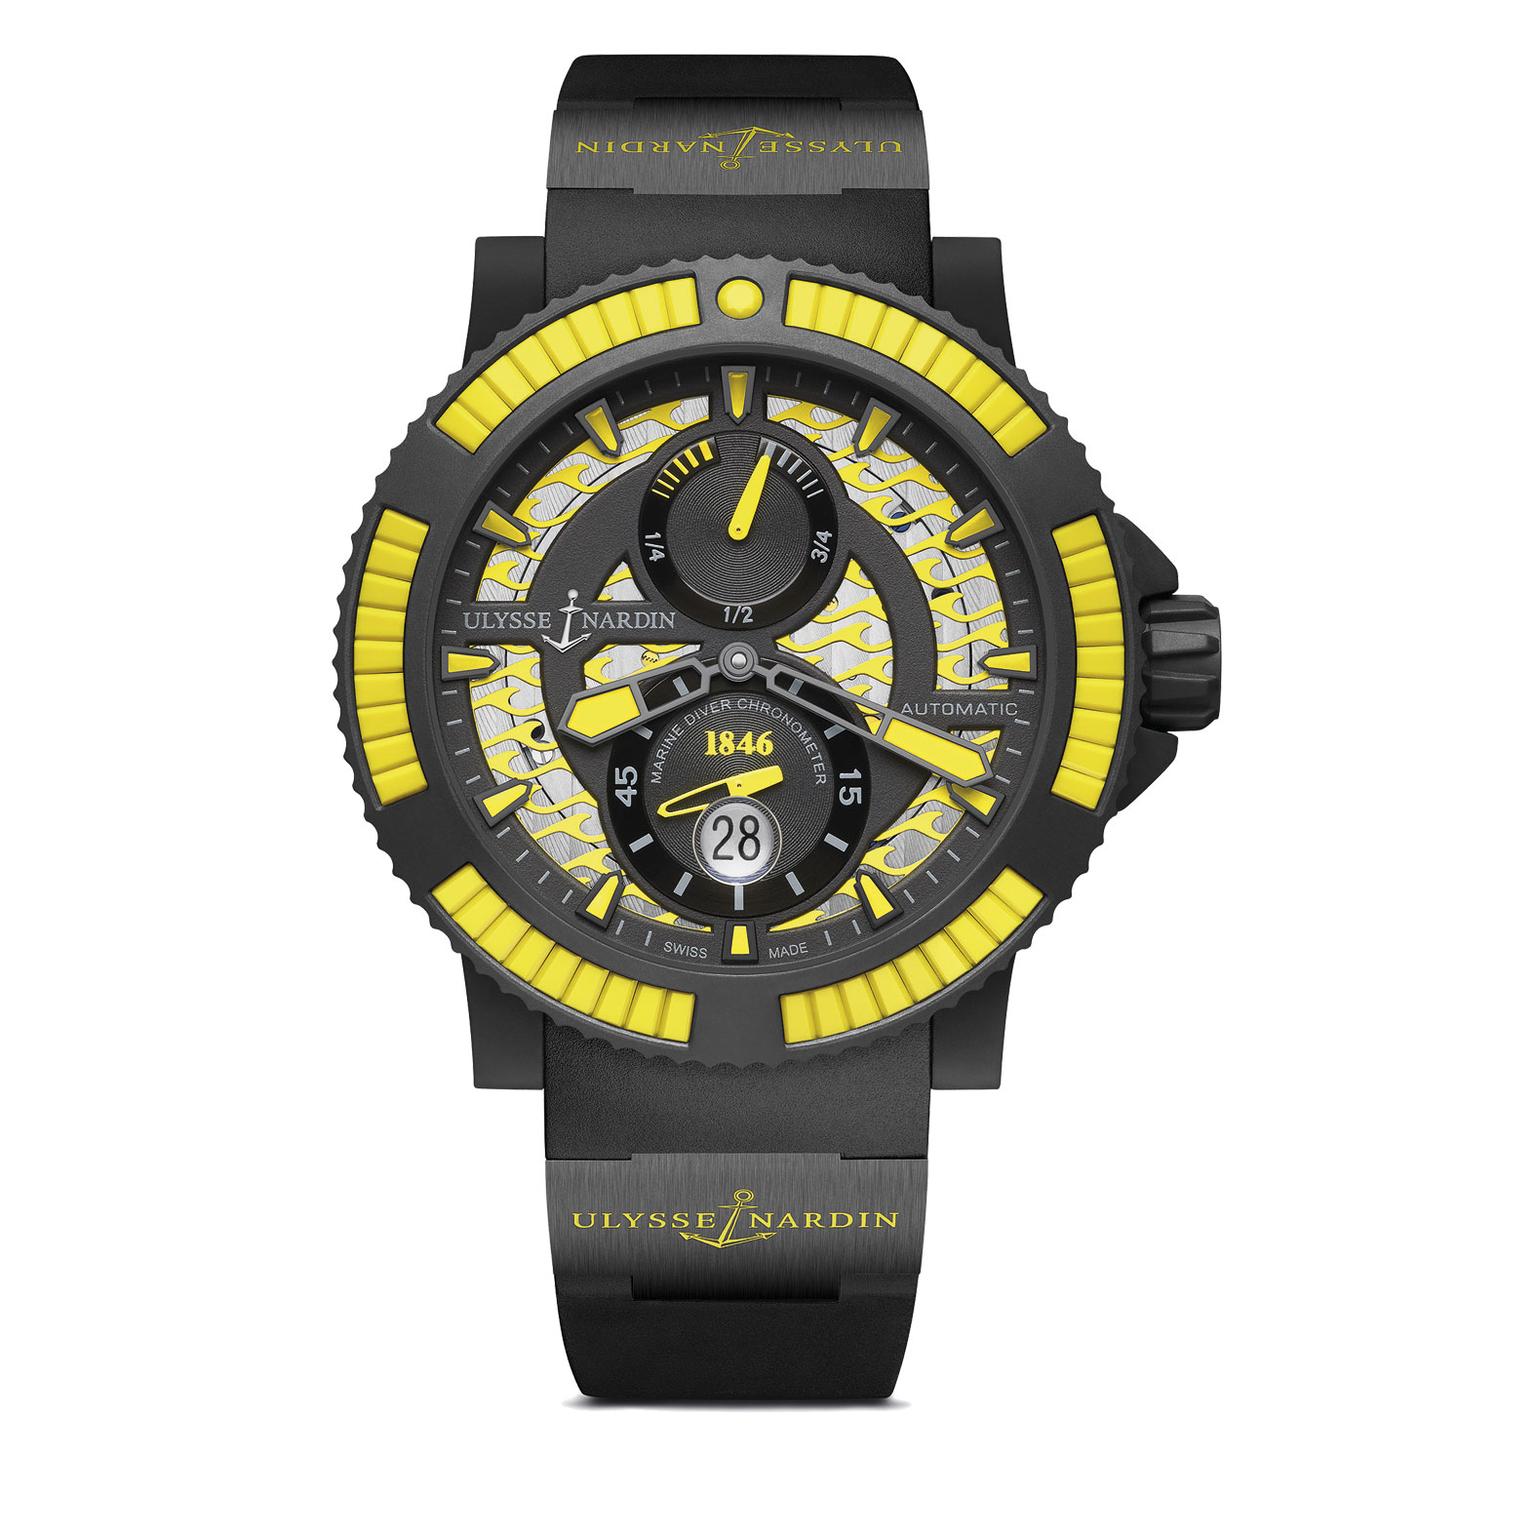 The coolest watches for him this Christmas